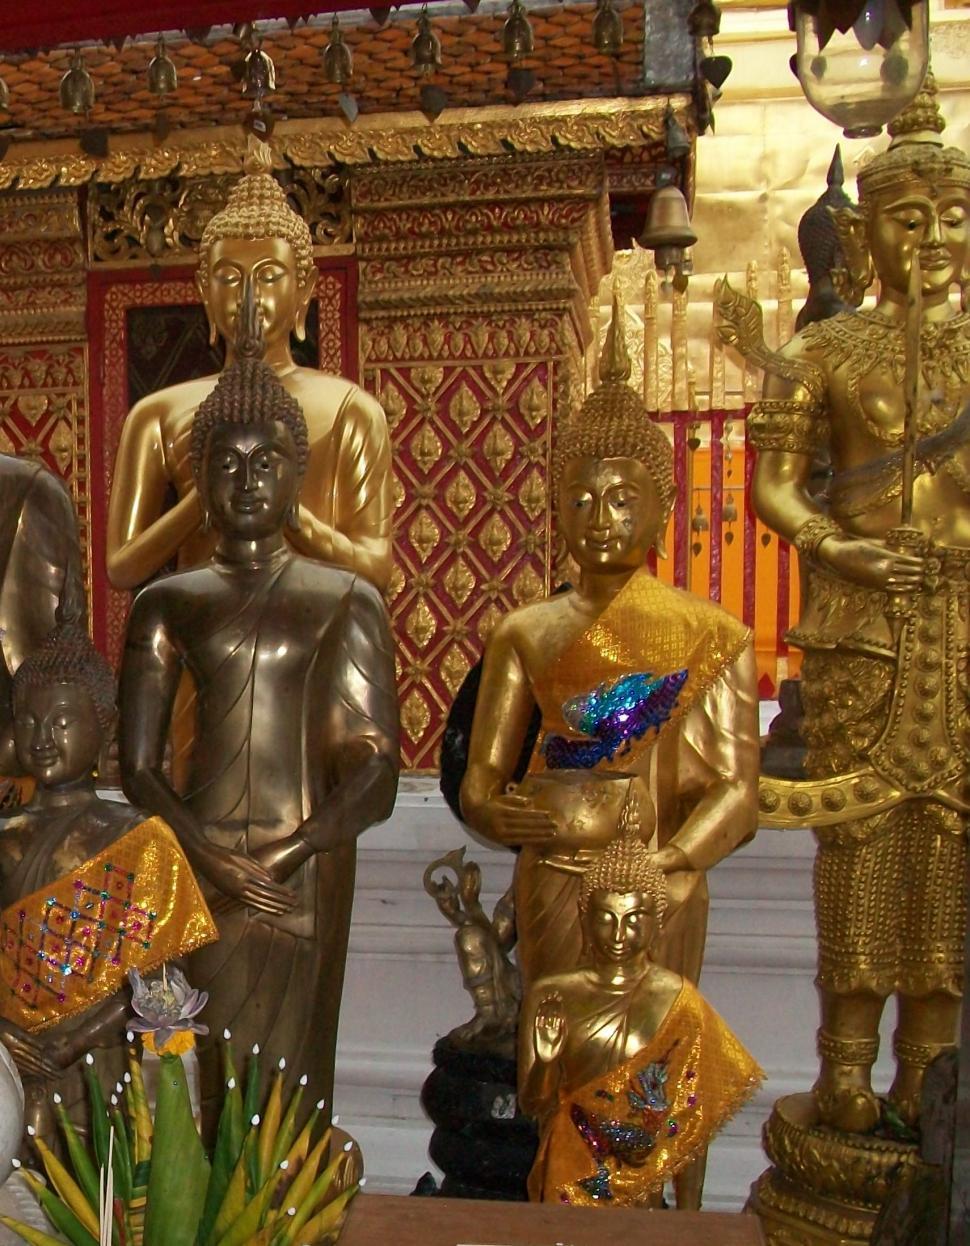 Free Image of Gold and Brass Buddhist Statues 